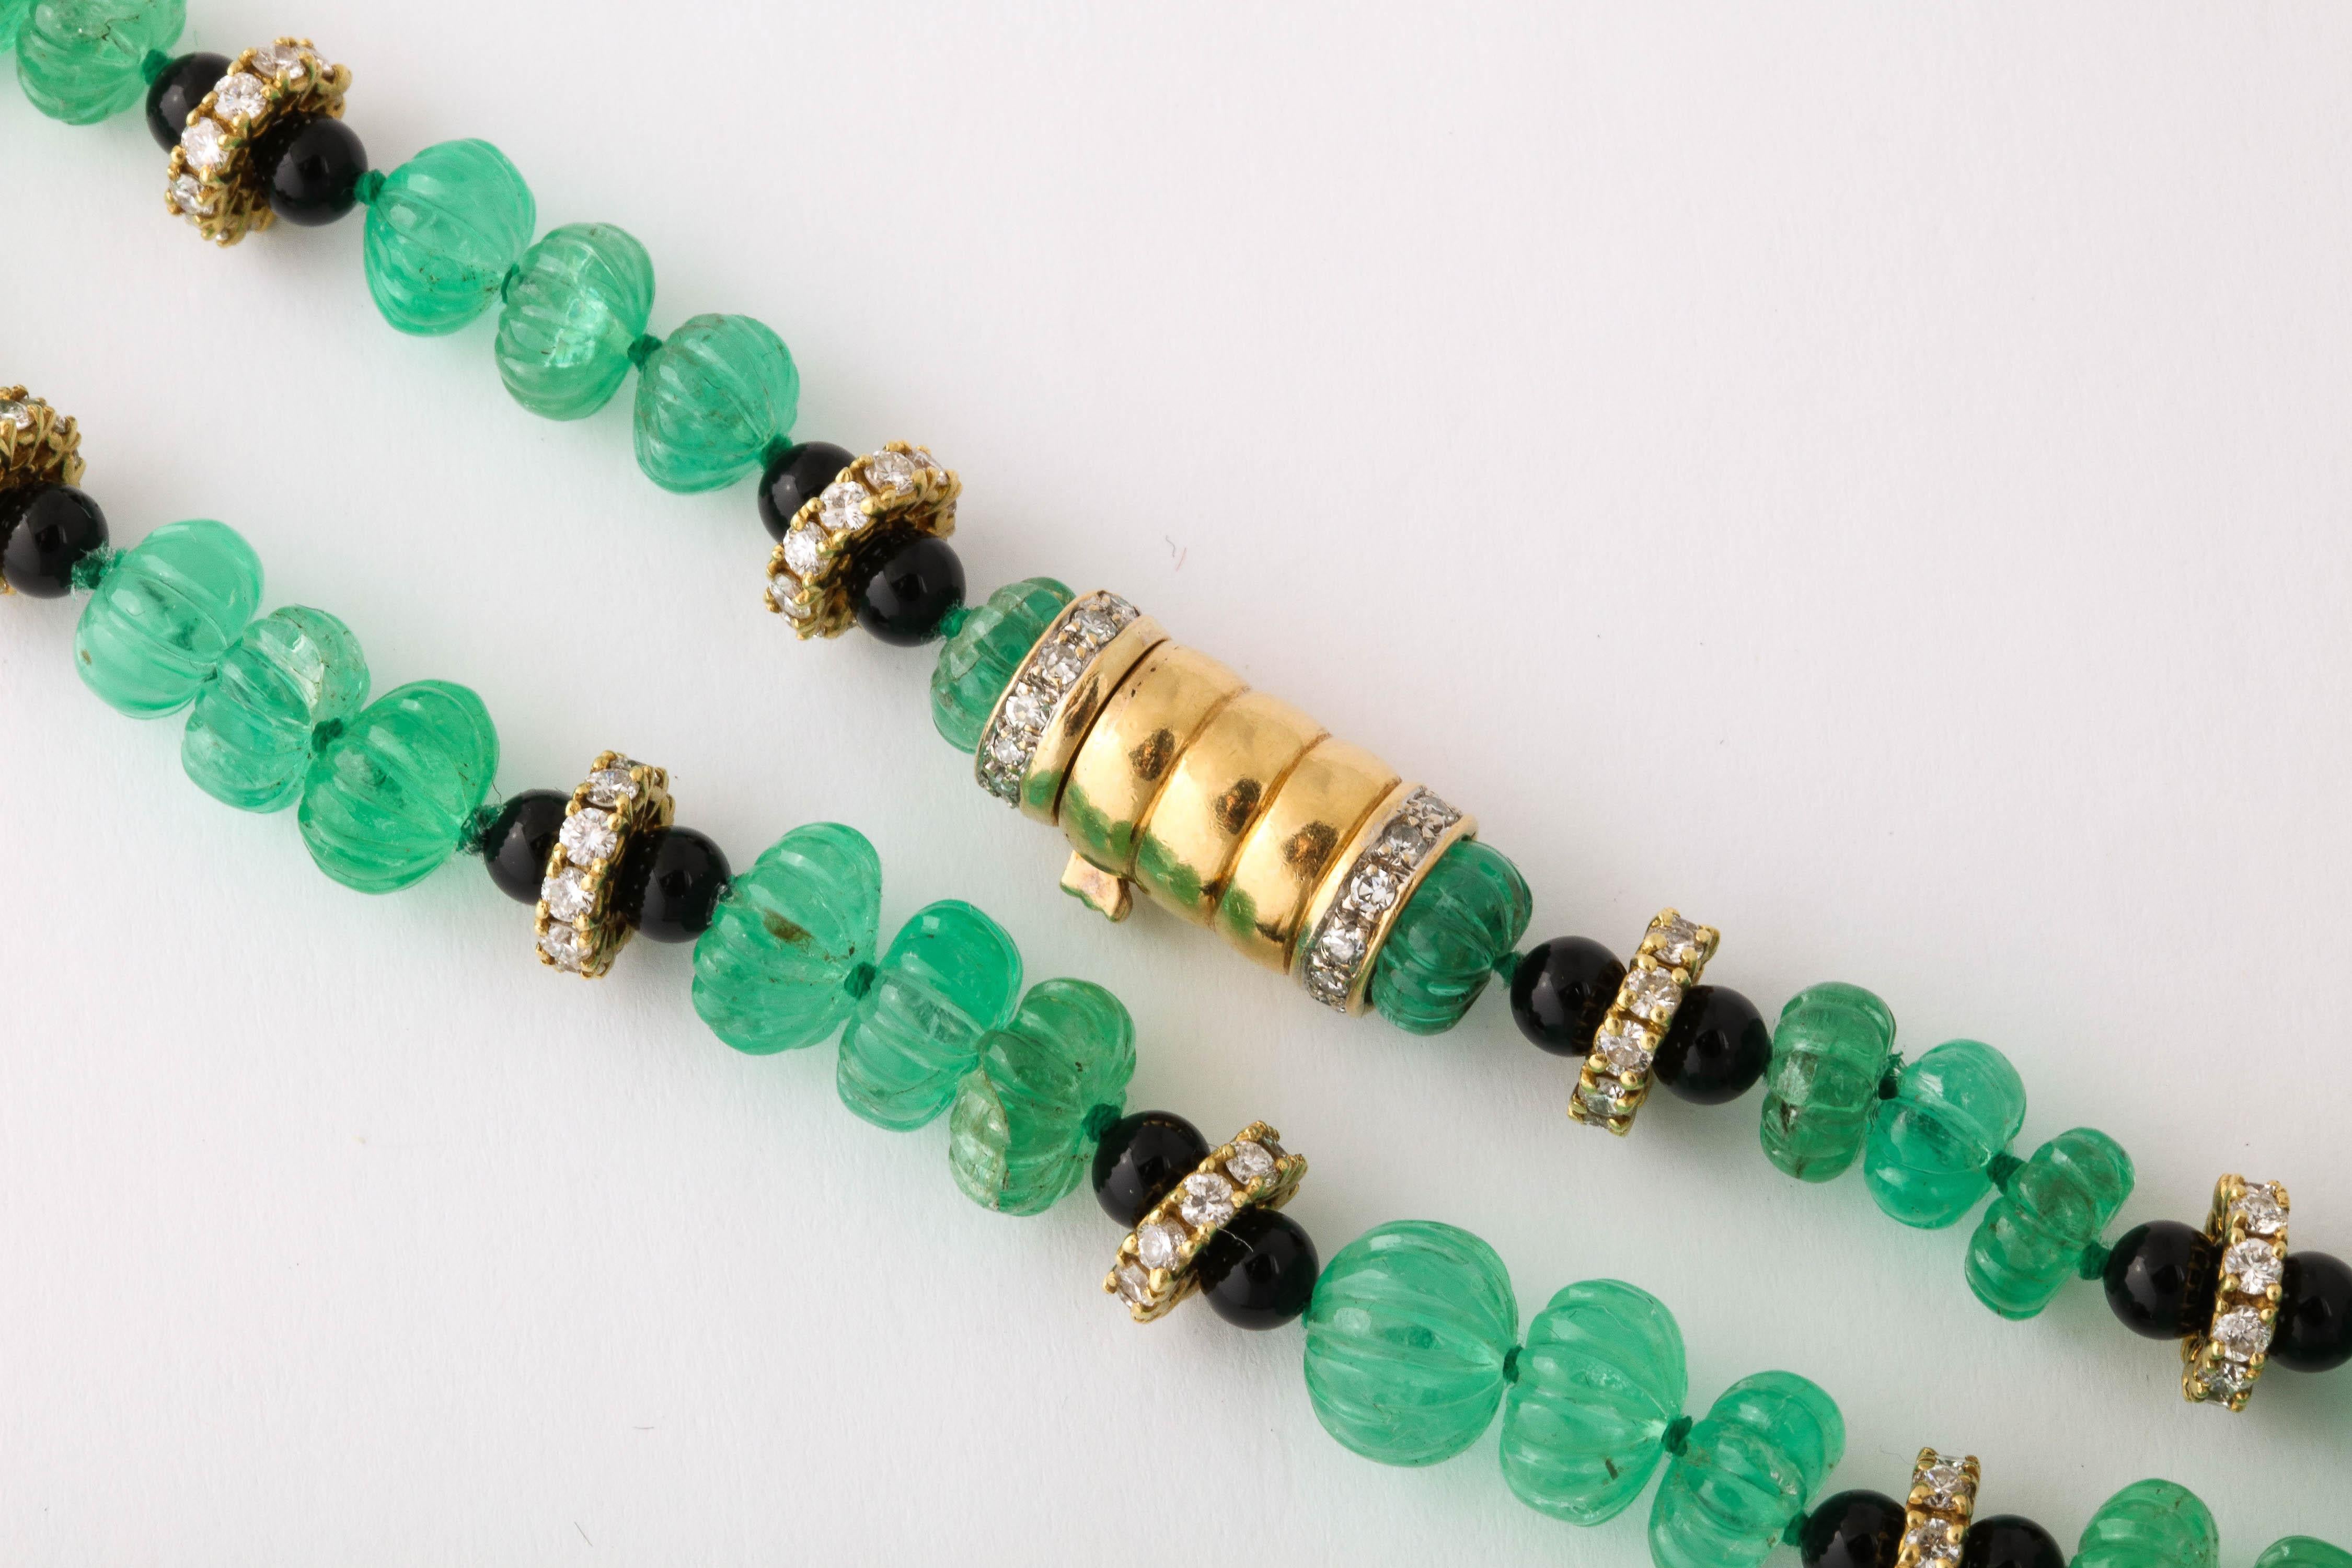 Art Deco Necklace of Graduated Melon Shaped Emerald Beads with Onyx and Diamond Spacers